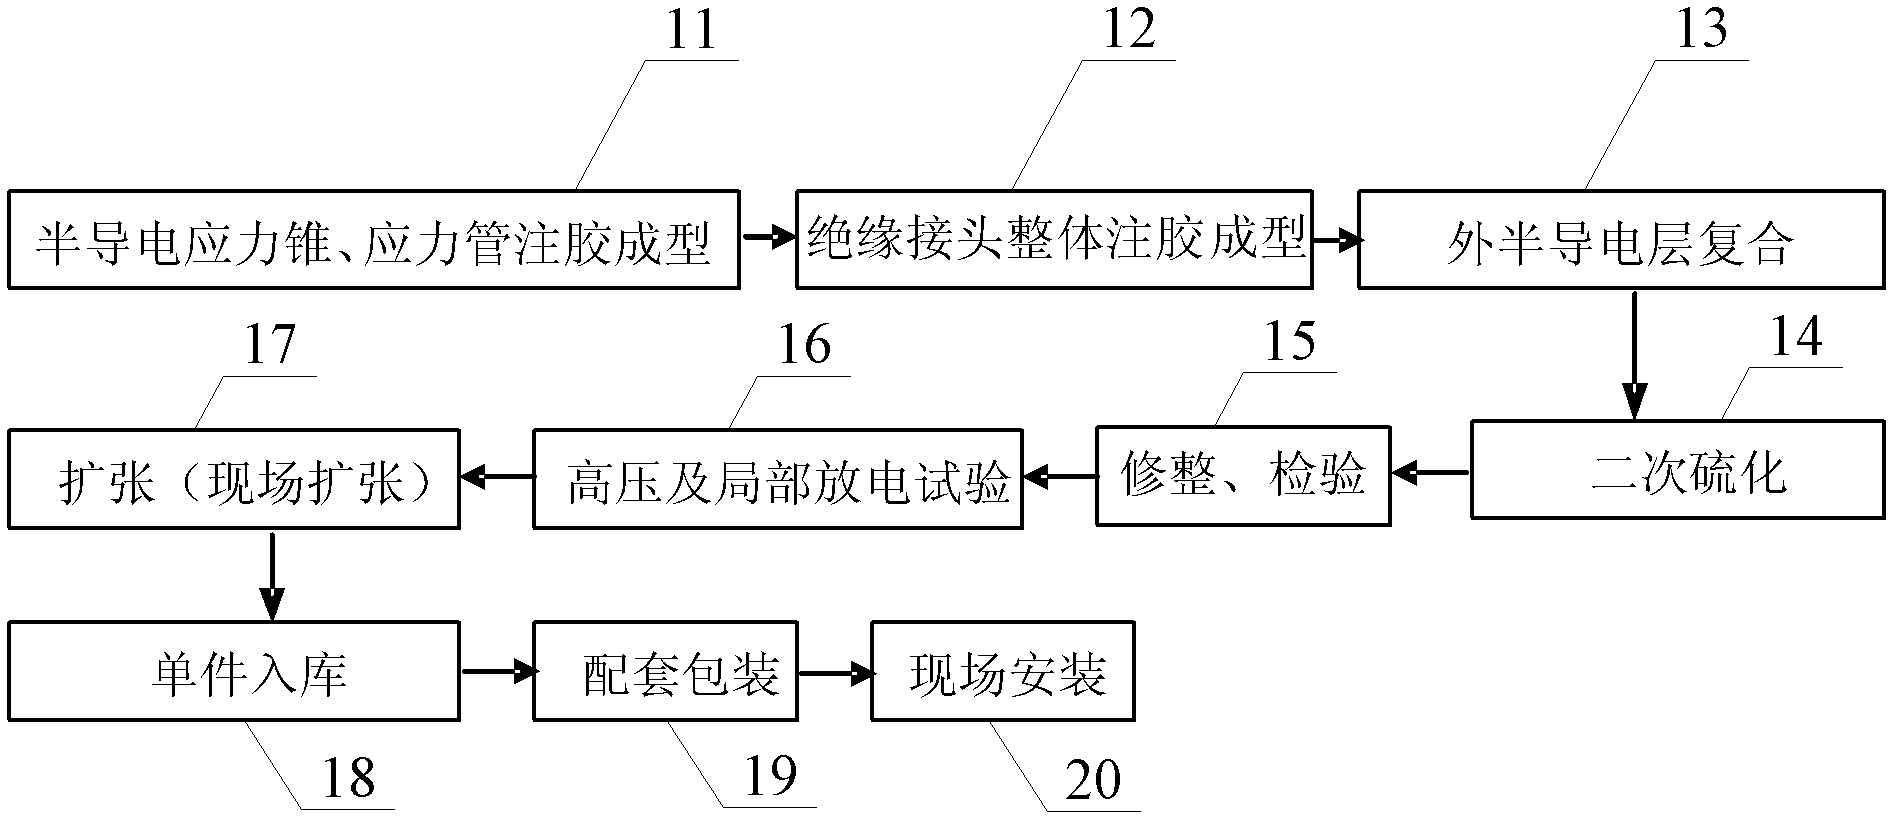 Production method of insulation intermediate connector